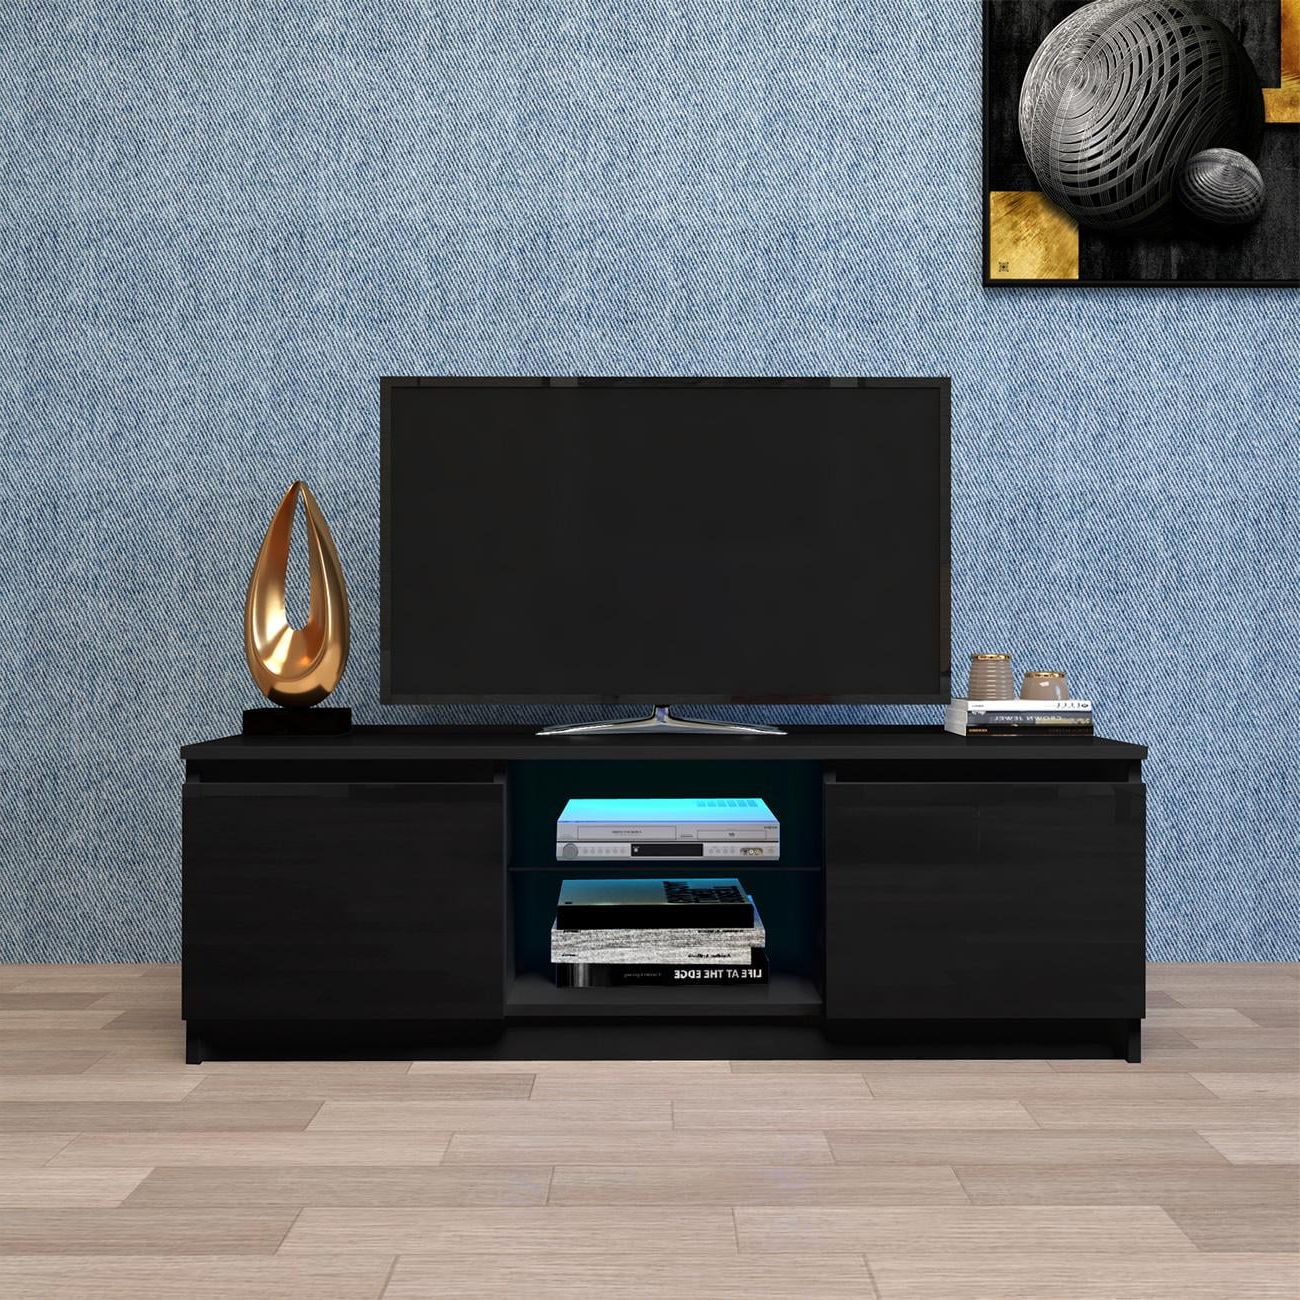 Tv Stand With Storage Drawers Shelves Led Rgb Lights, For Flat Tv 40 55 Throughout Most Popular Tv Stands With Lights (View 13 of 15)